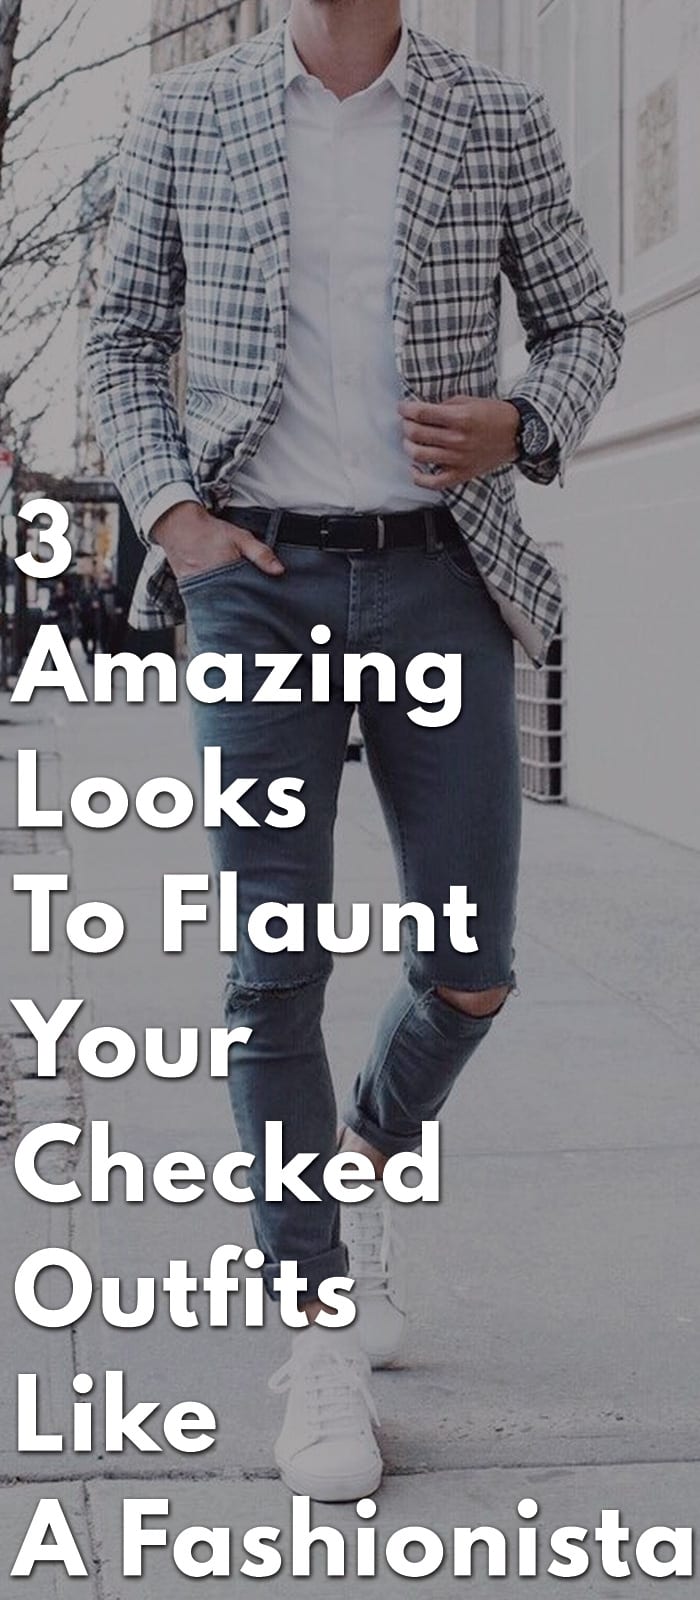 3-Amazing-Looks-To-Flaunt-Your-Checked-Outfits-Like-A-Fashionista